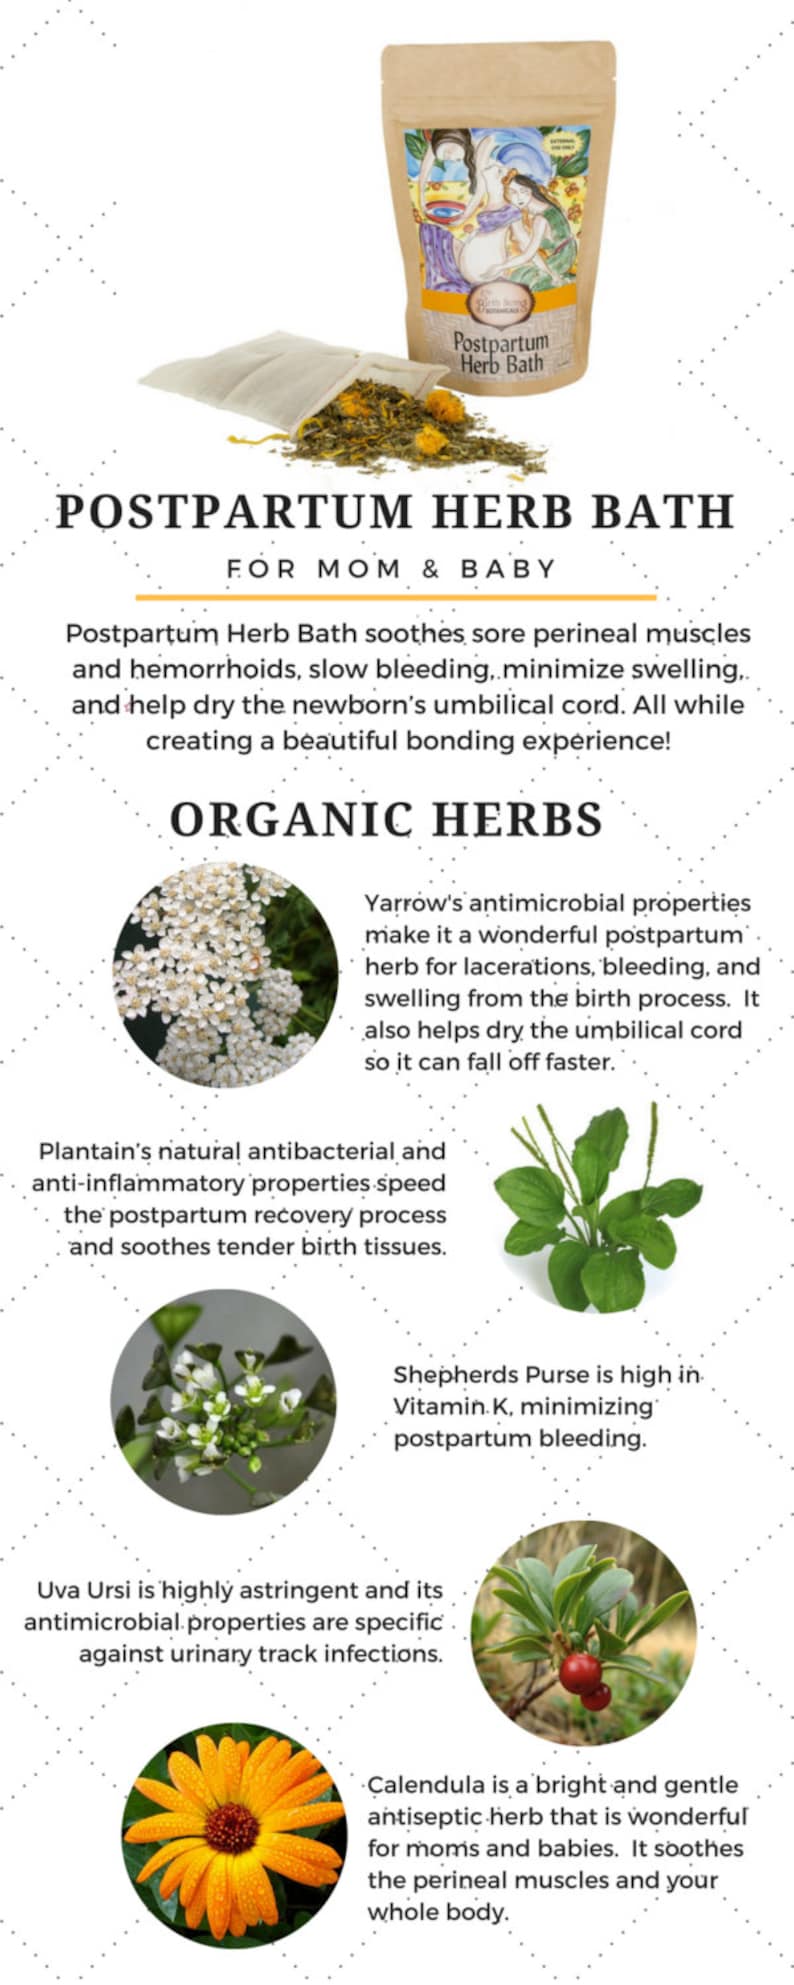 Postpartum Herbal Bath Soak for After Birth Recovery for Mom and Baby by Birth Song Botanicals. Blended with All Natural and Organic Herbs. image 7